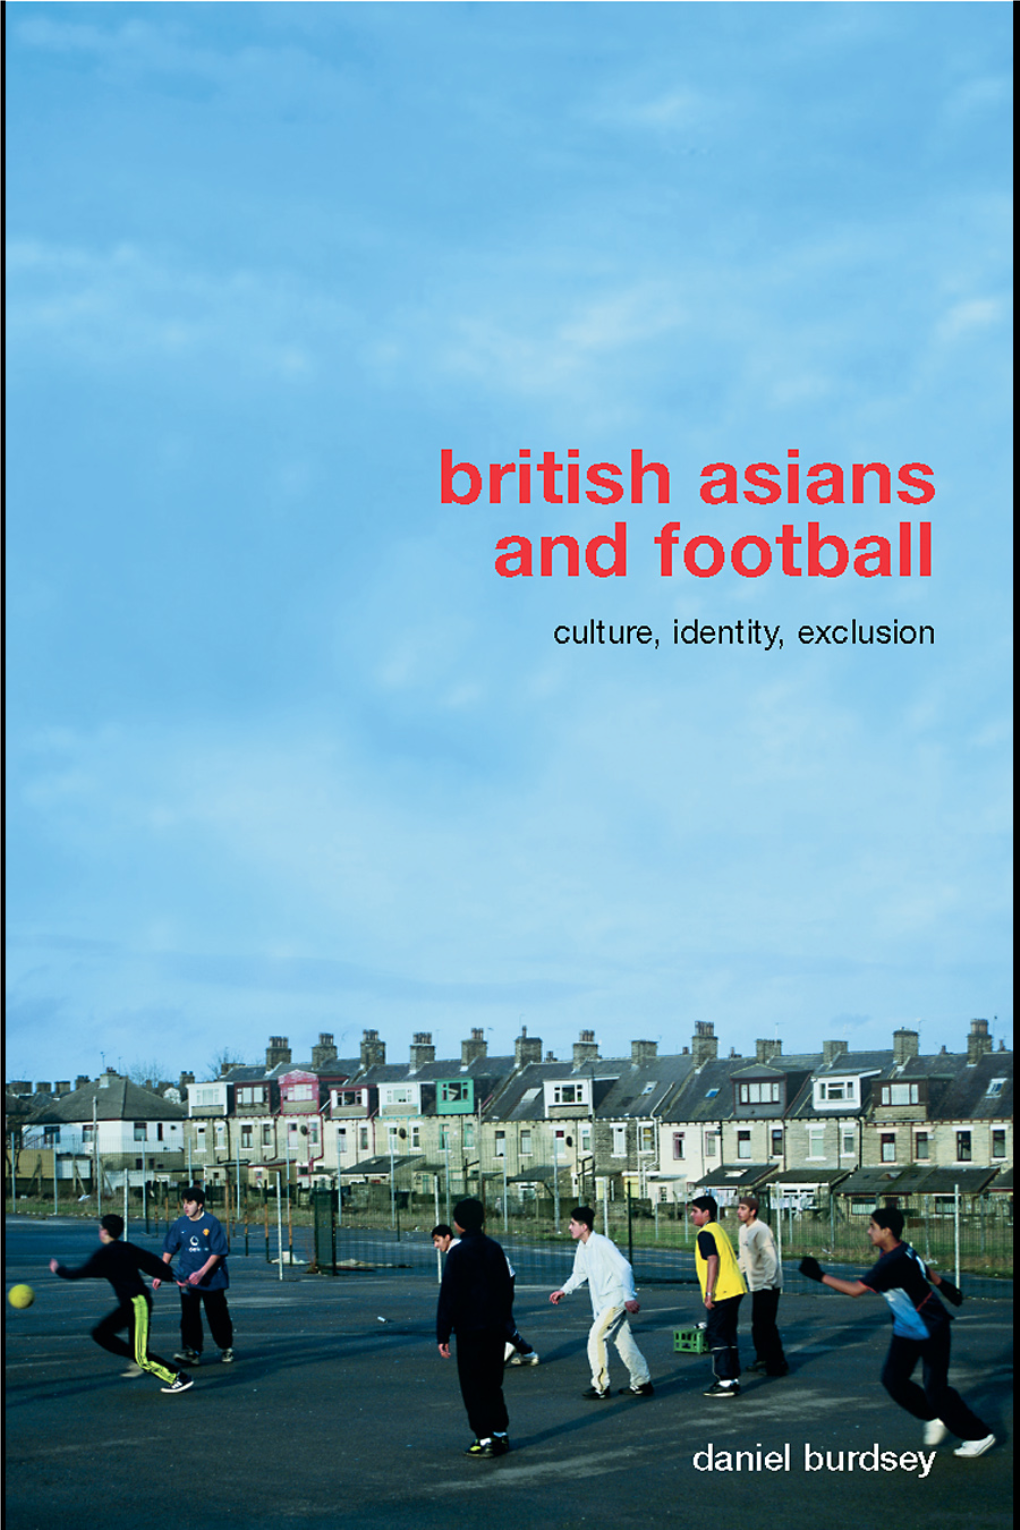 British Asians and Football: Culture, Identity, Exclusion/Daniel Burdsey